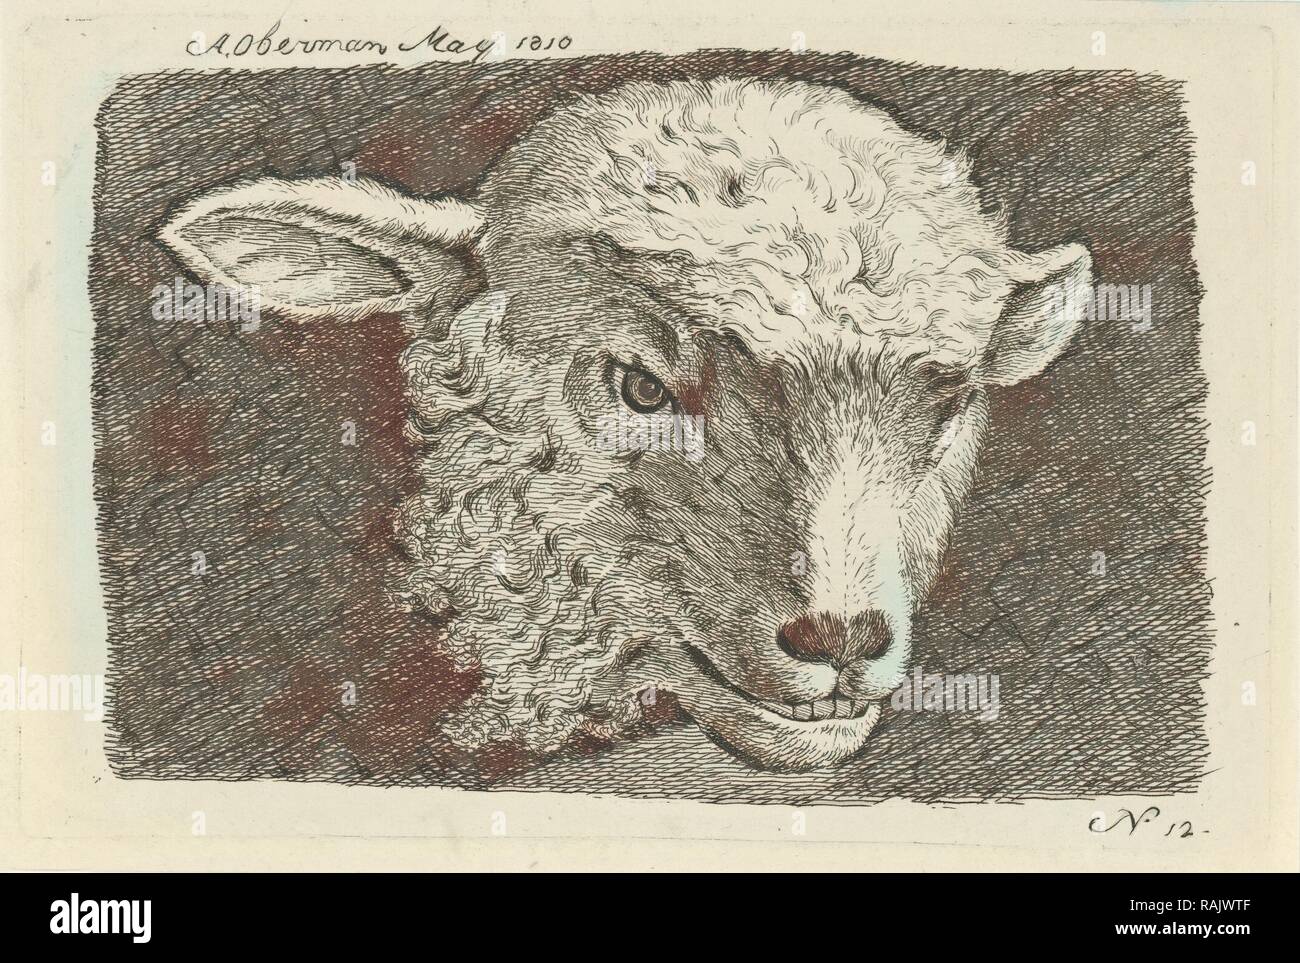 Head of a lamb, Anthony Oberman, 1810. Reimagined by Gibon. Classic art with a modern twist reimagined Stock Photo